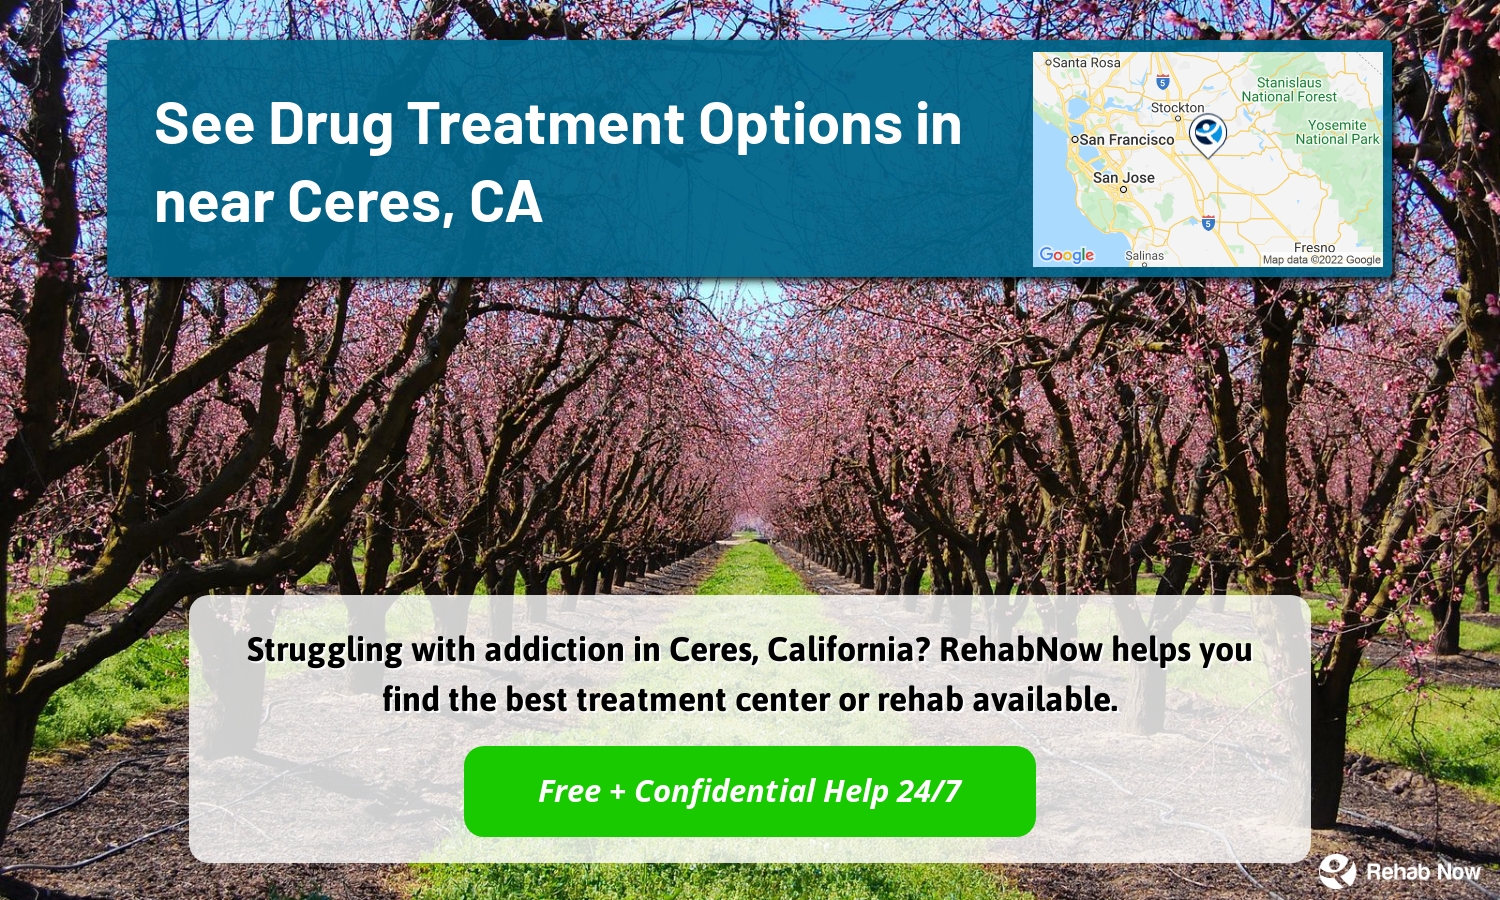 Struggling with addiction in Ceres, California? RehabNow helps you find the best treatment center or rehab available.